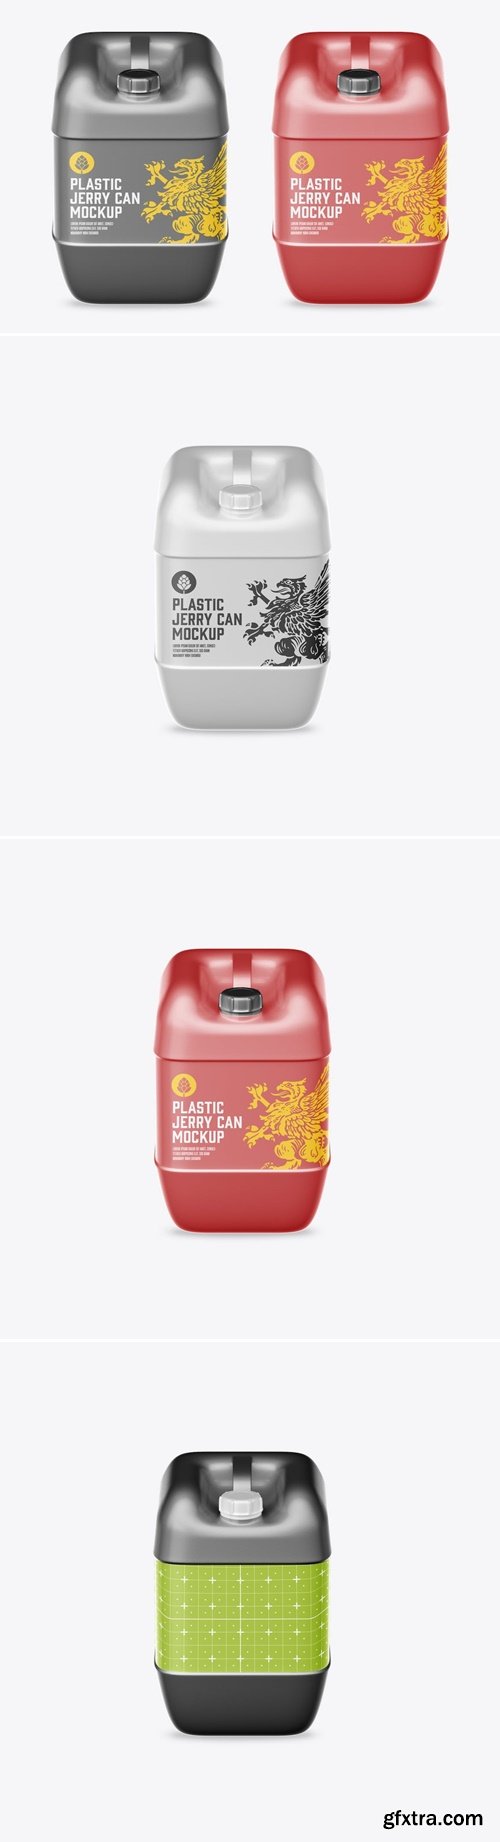 Plastic Jerry Can Mockup 9PSXC5S